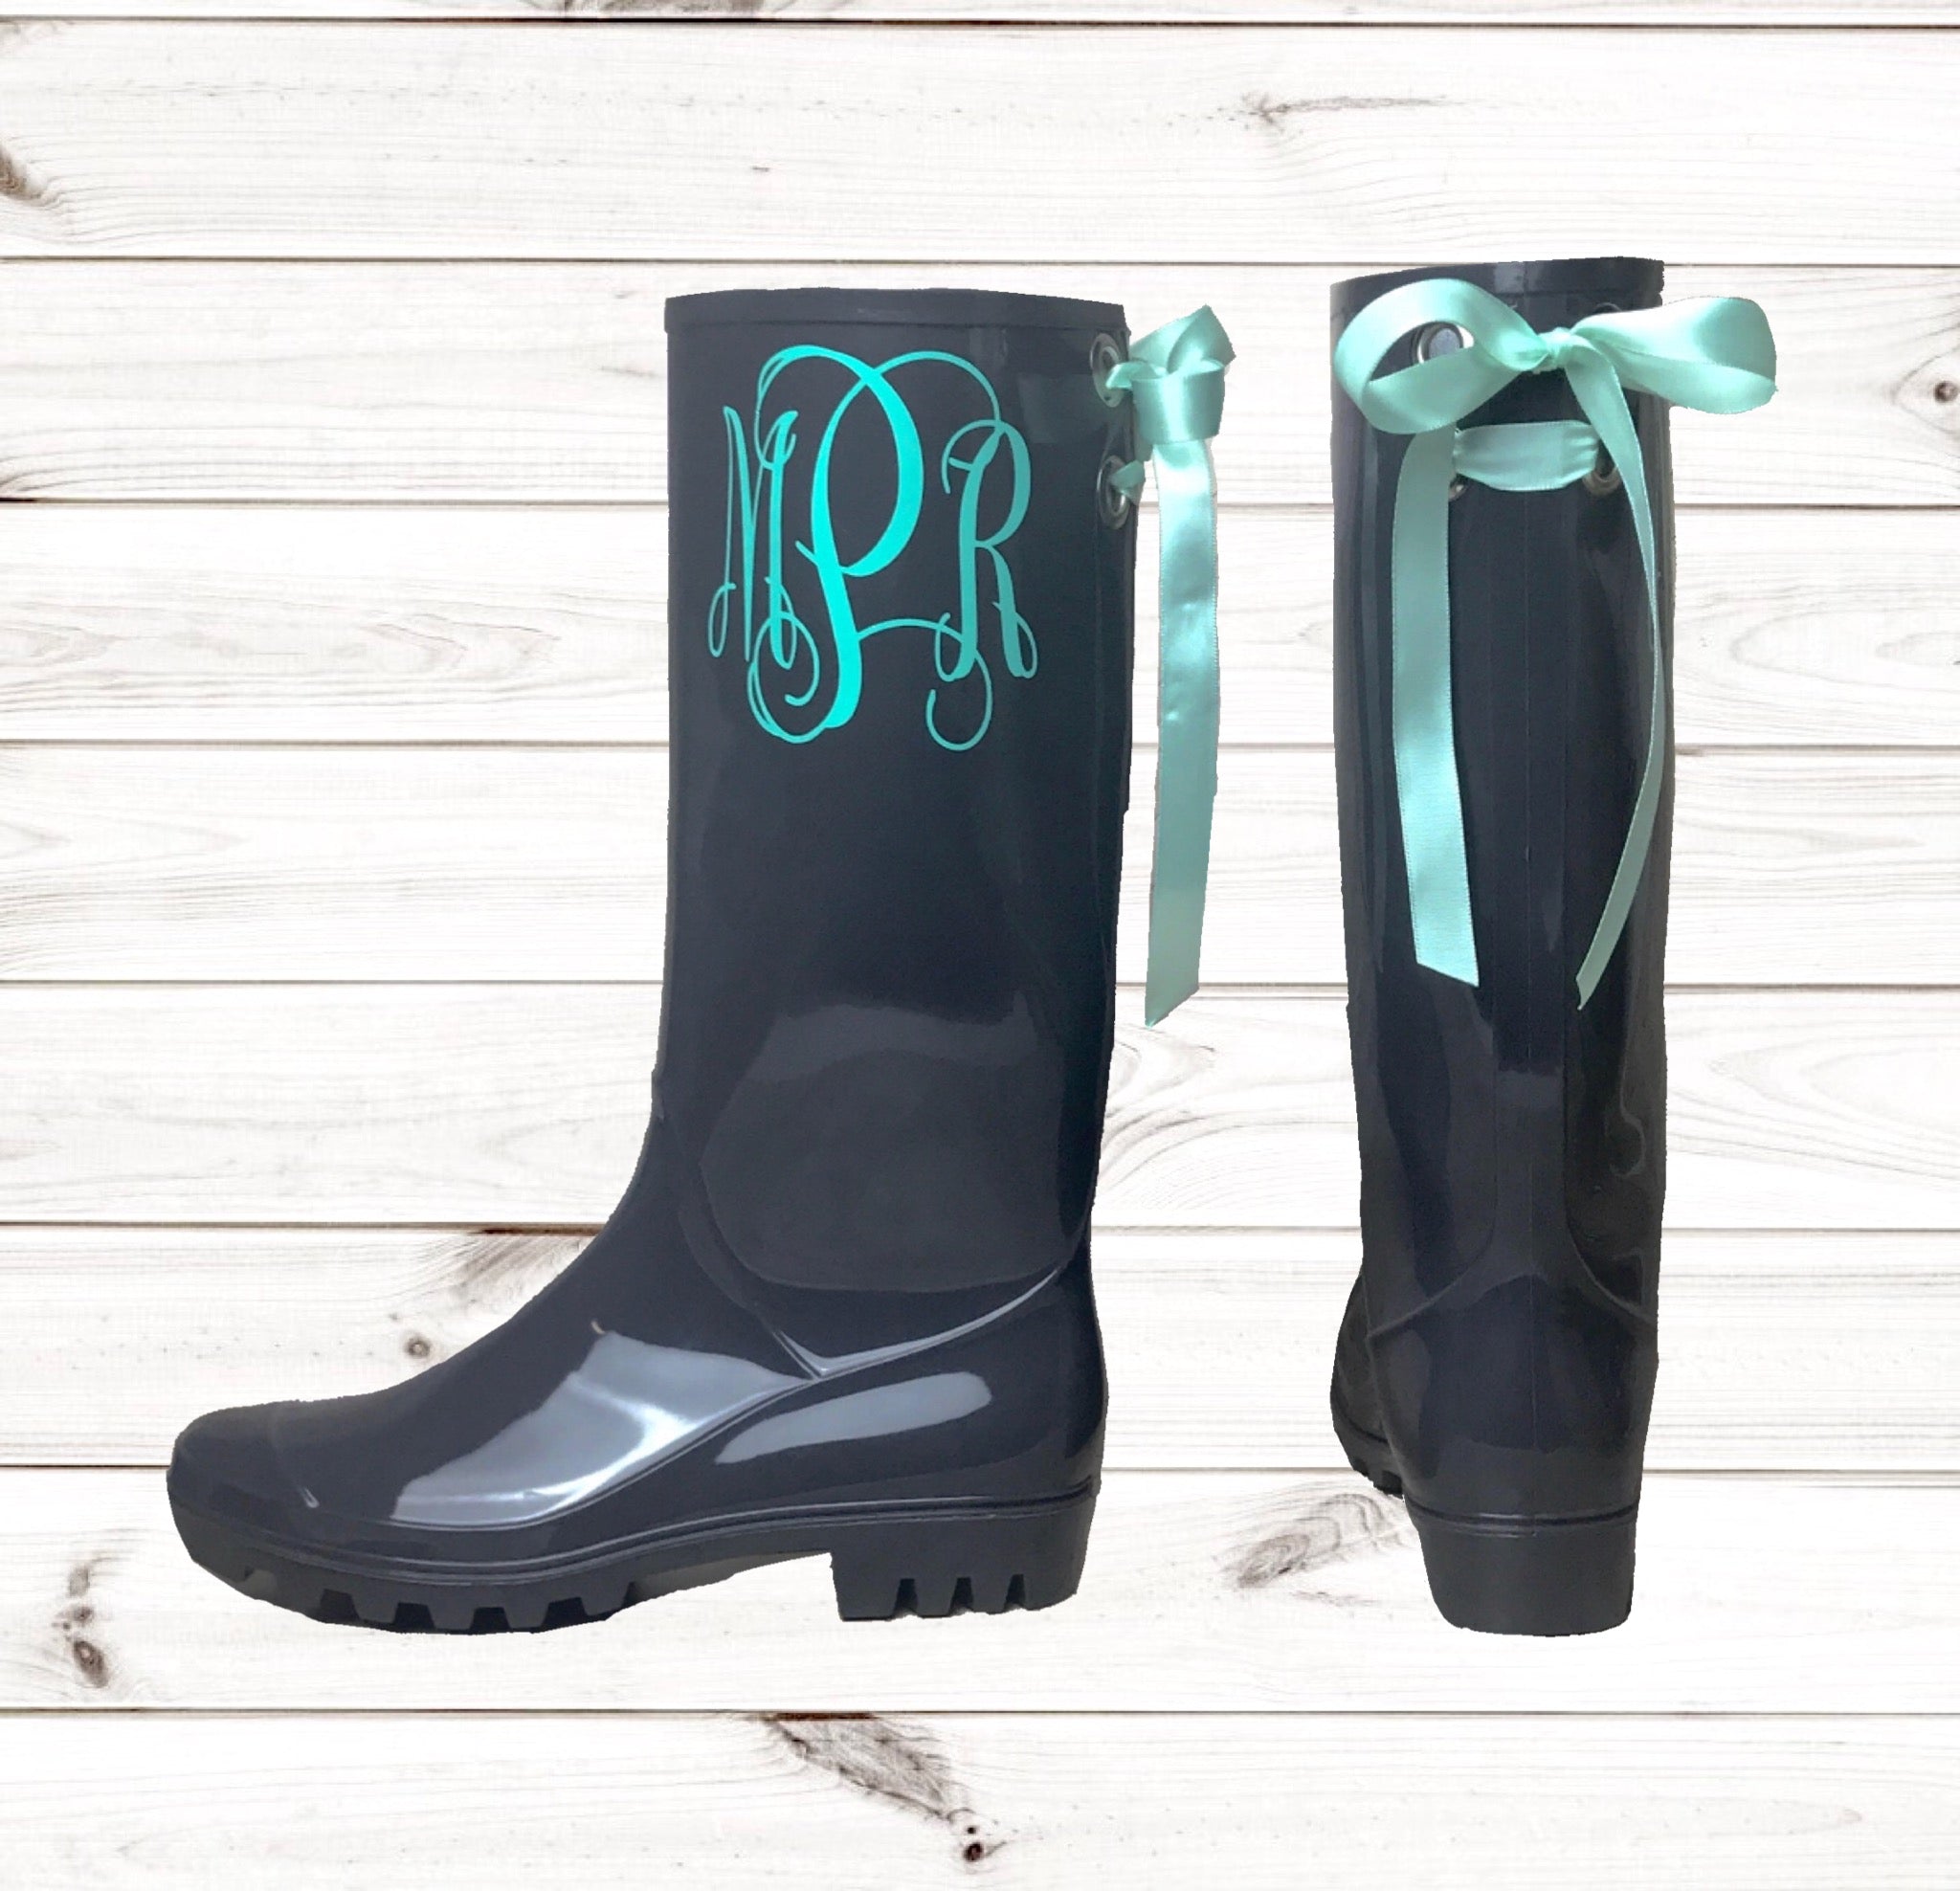 monogrammed rain boots with bows